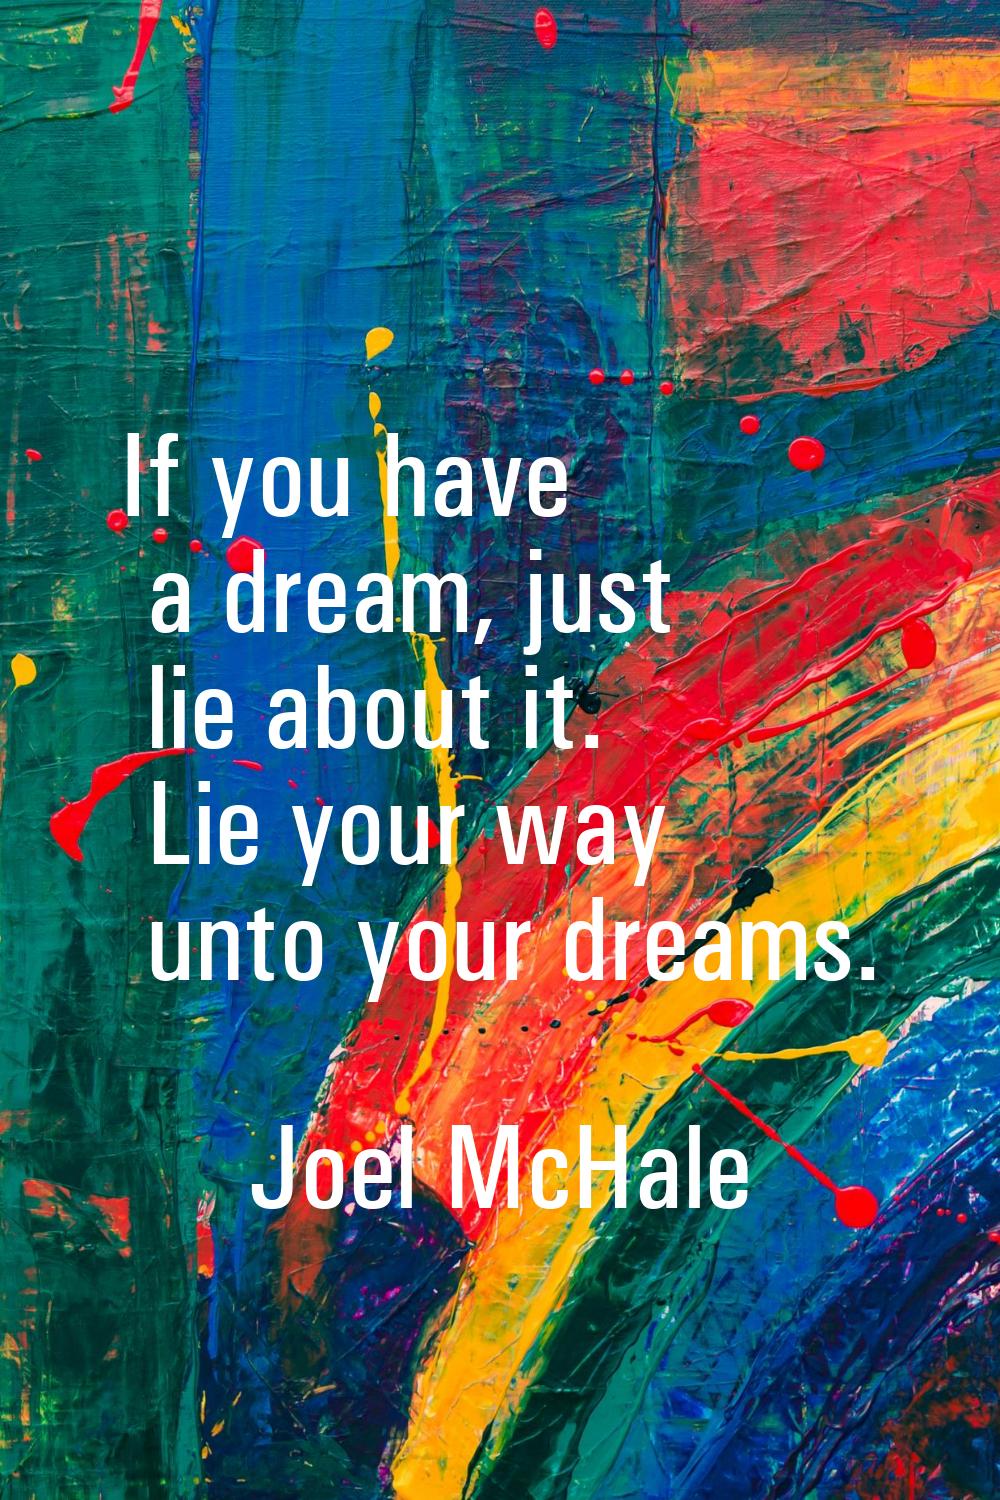 If you have a dream, just lie about it. Lie your way unto your dreams.